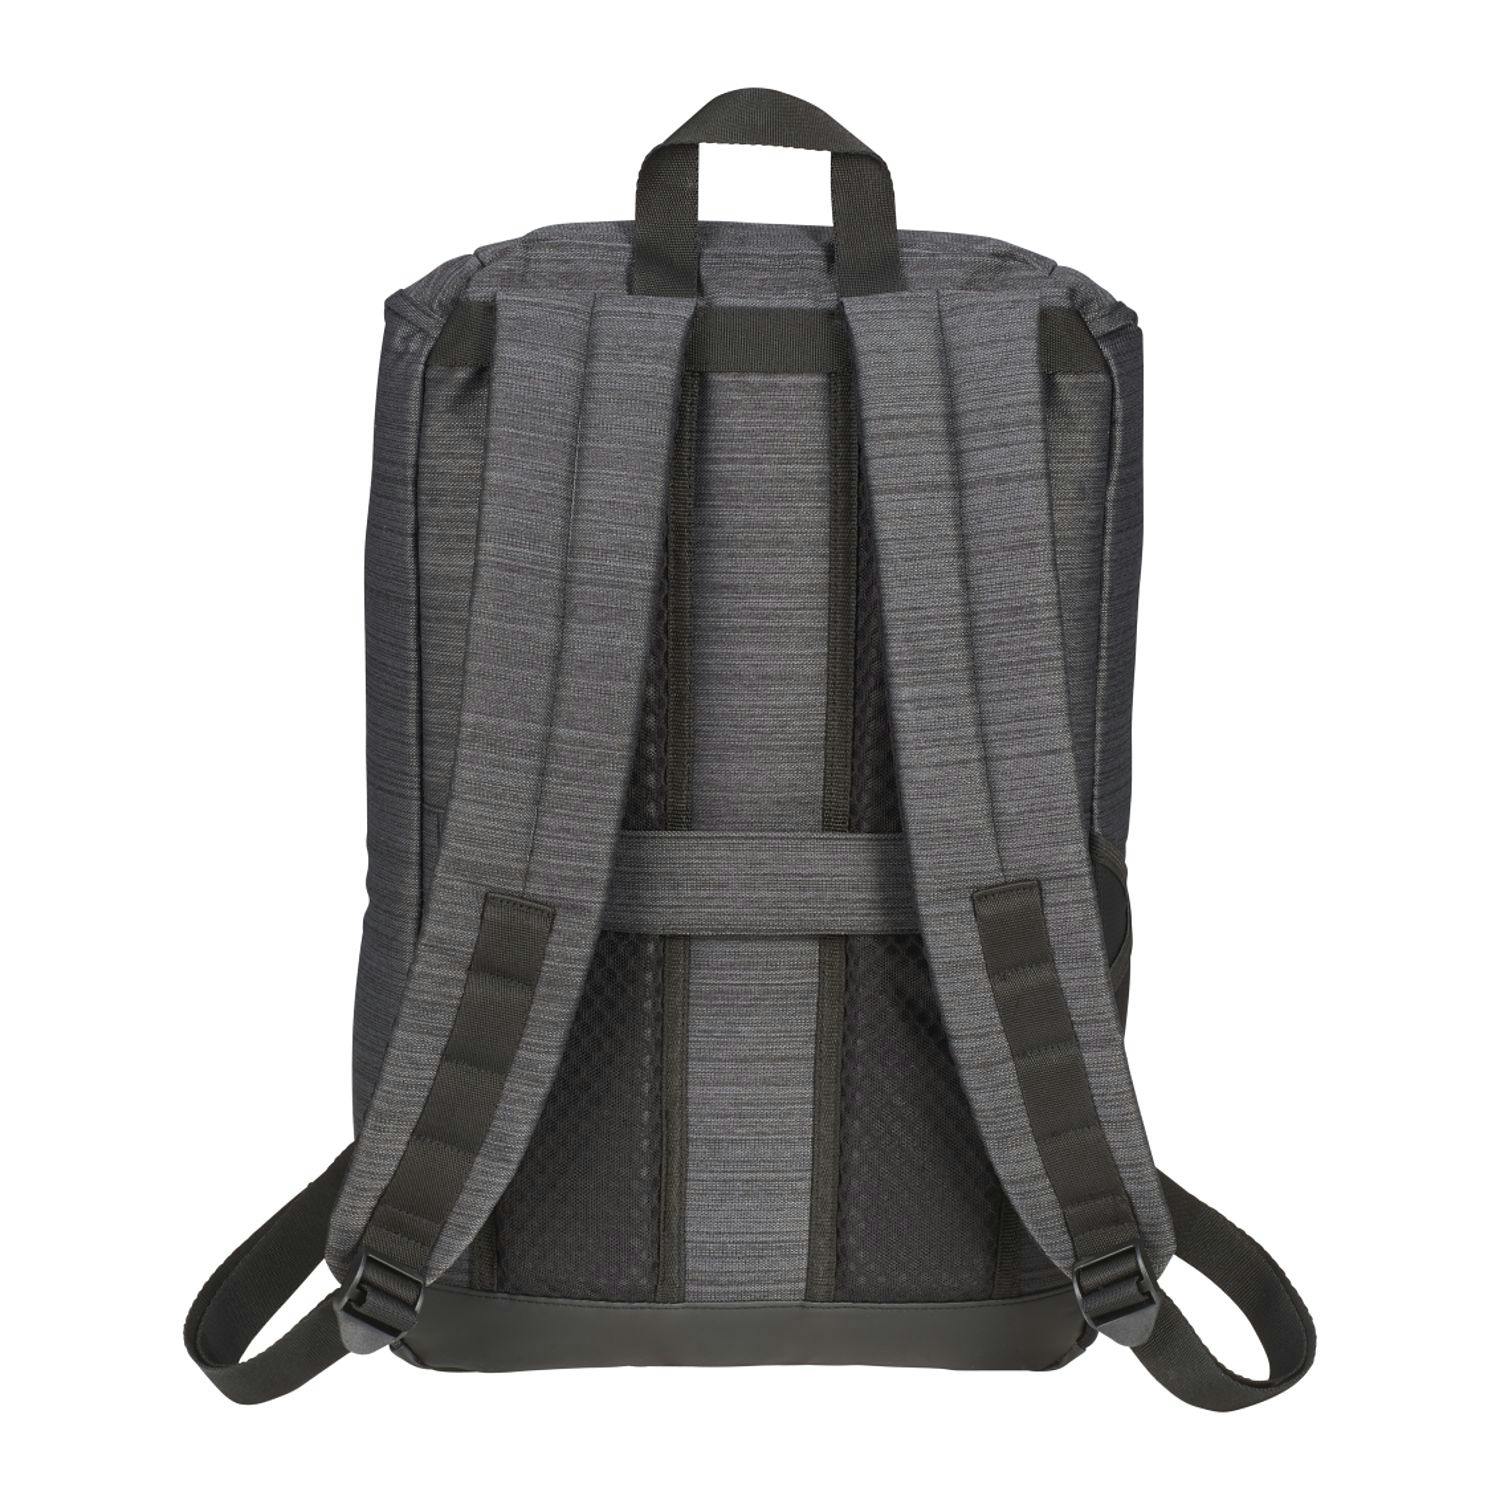 NBN Mayfair 15" Computer Backpack - additional Image 2